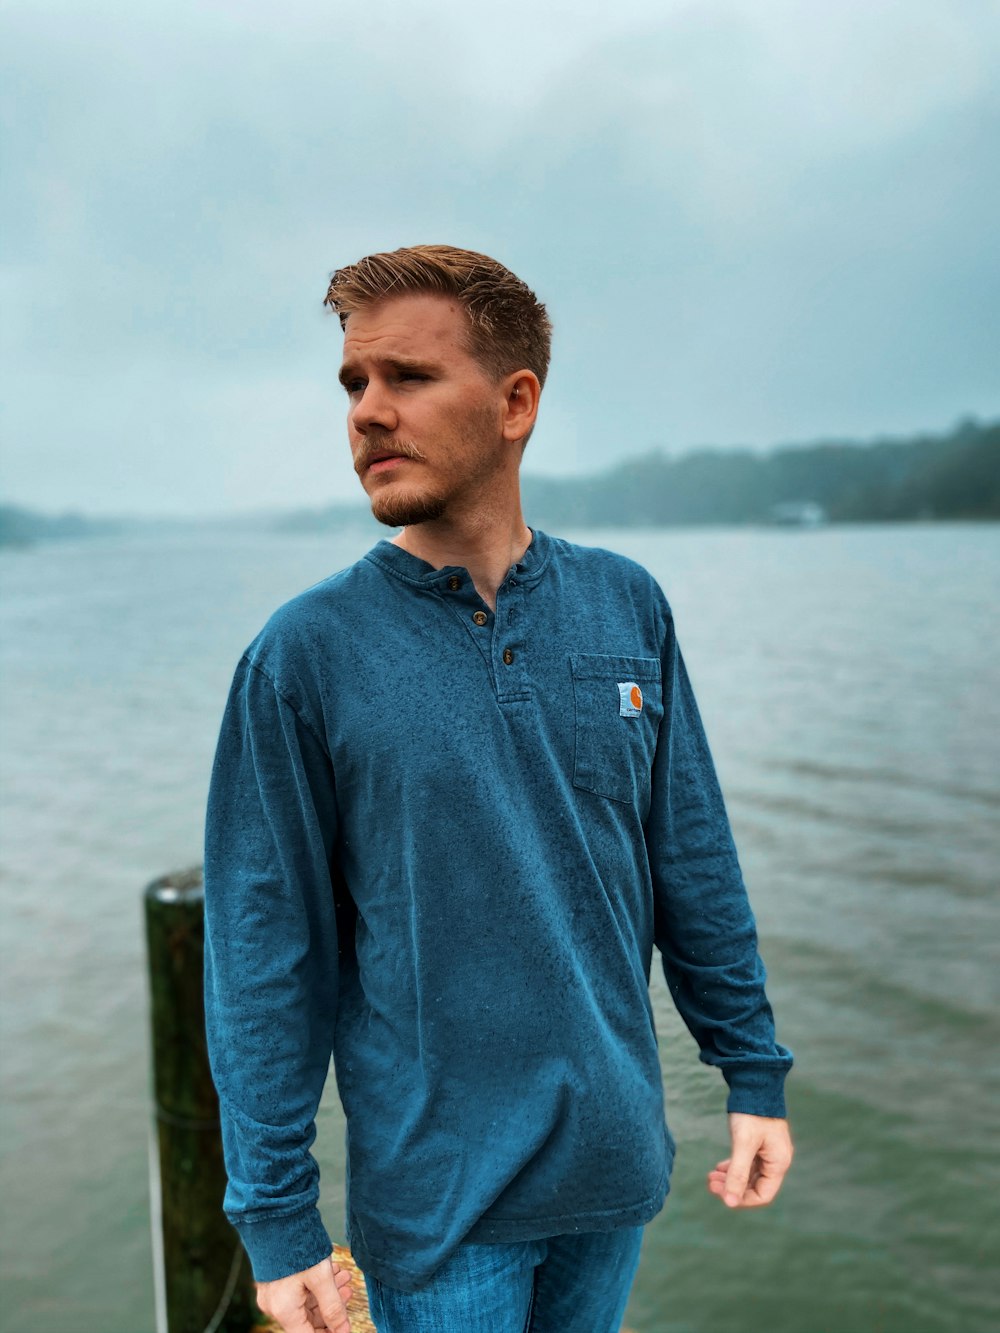 man in blue dress shirt standing near body of water during daytime